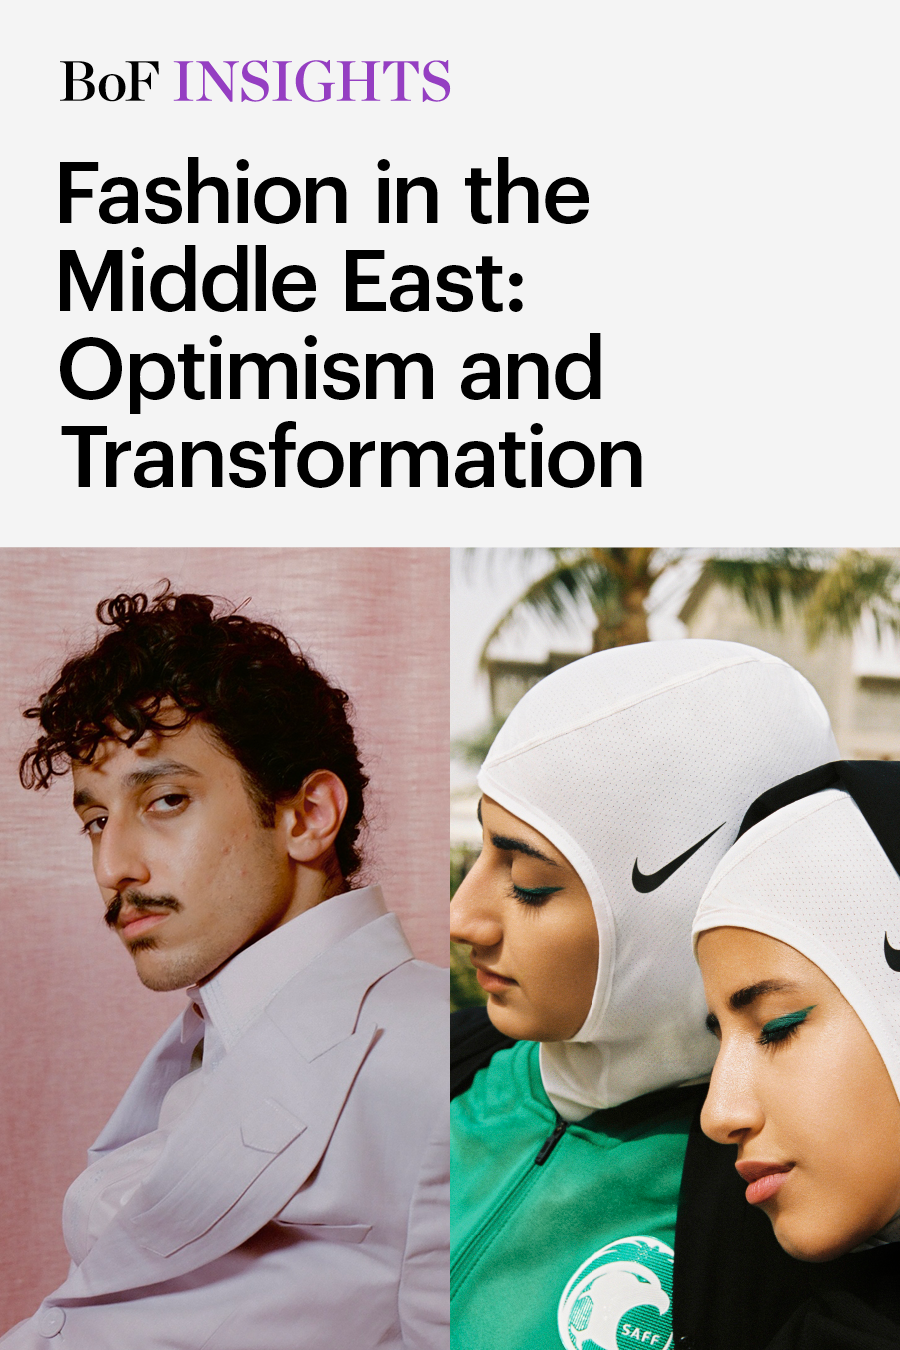 BoF Insights, Fashion in the Middle East: Optimism and Transformation